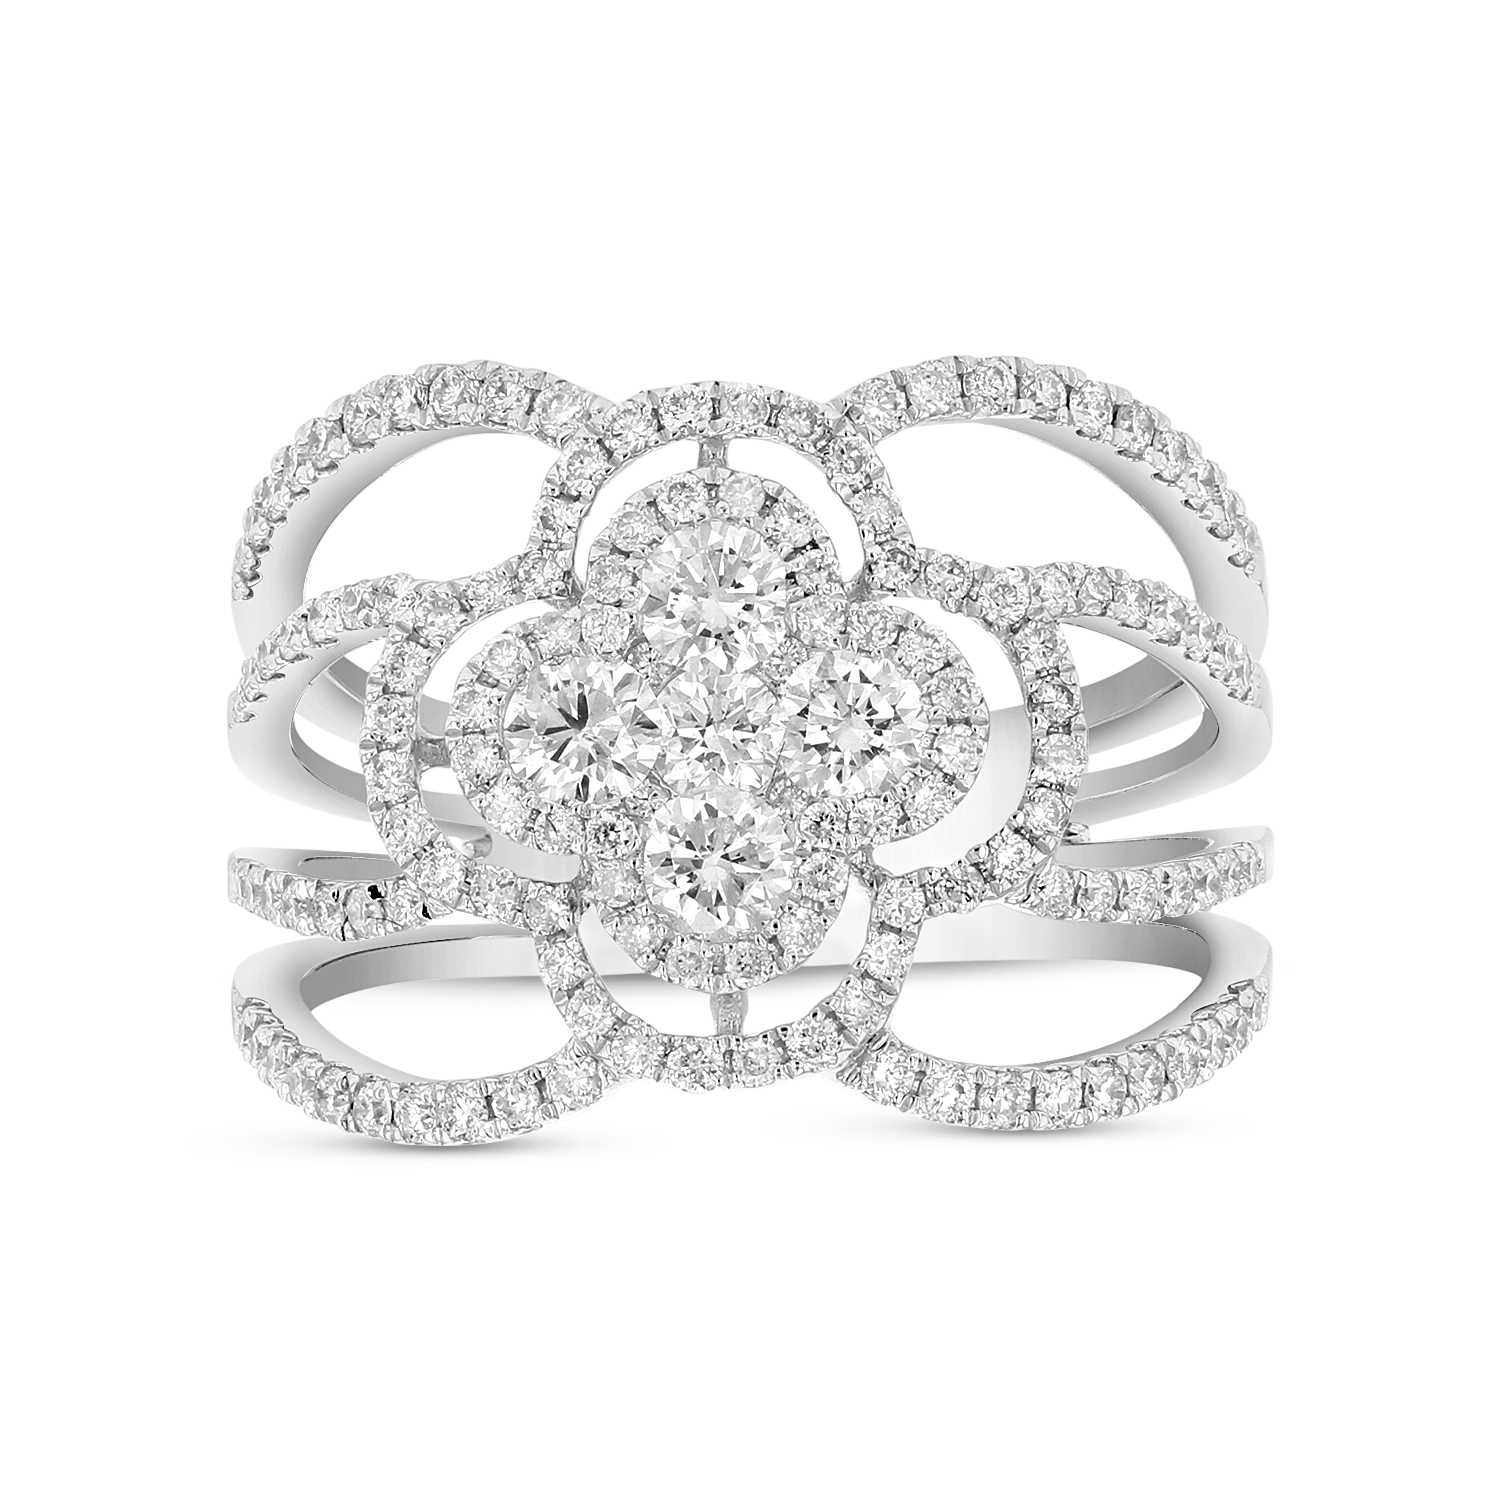 View 1.05ctw Diamond Clover Fashion Ring in 18k White Gold